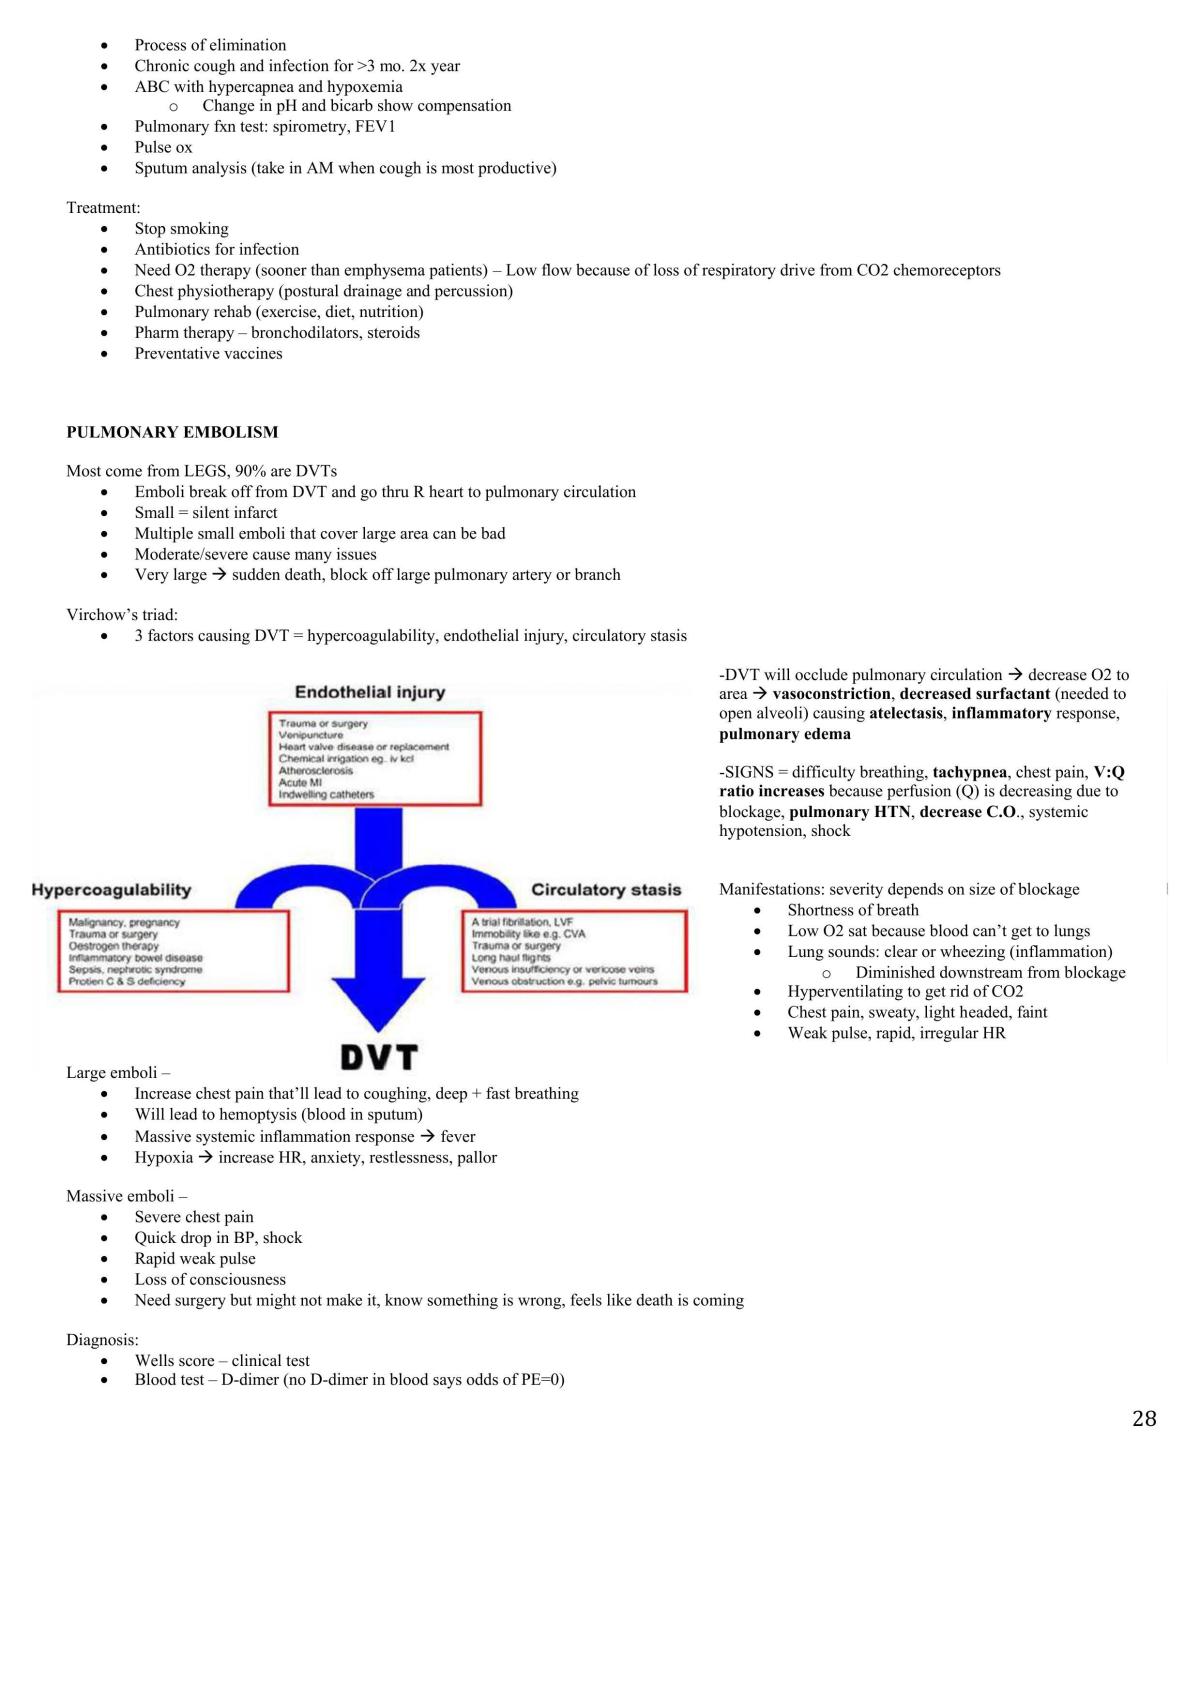 Pathophysiology Study Guide: Final Exam - Page 28